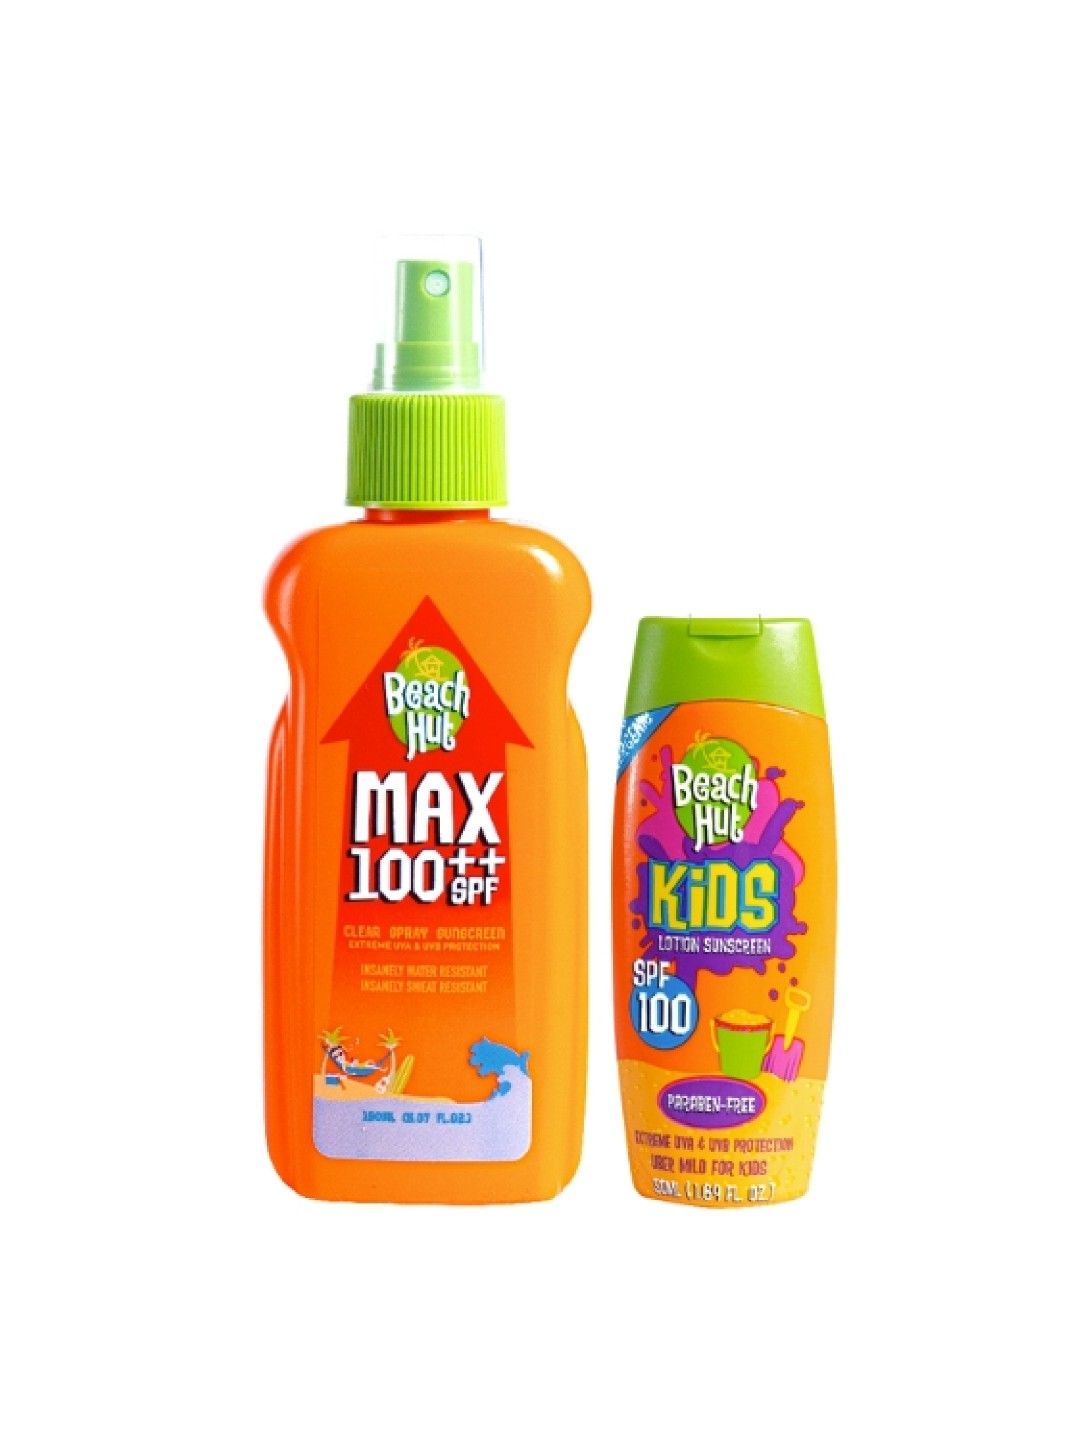 Beach Hut Family Beach Kit with MAX SPF 100 Clear Sunscreen Spray and Kids SPF 100 Lotion